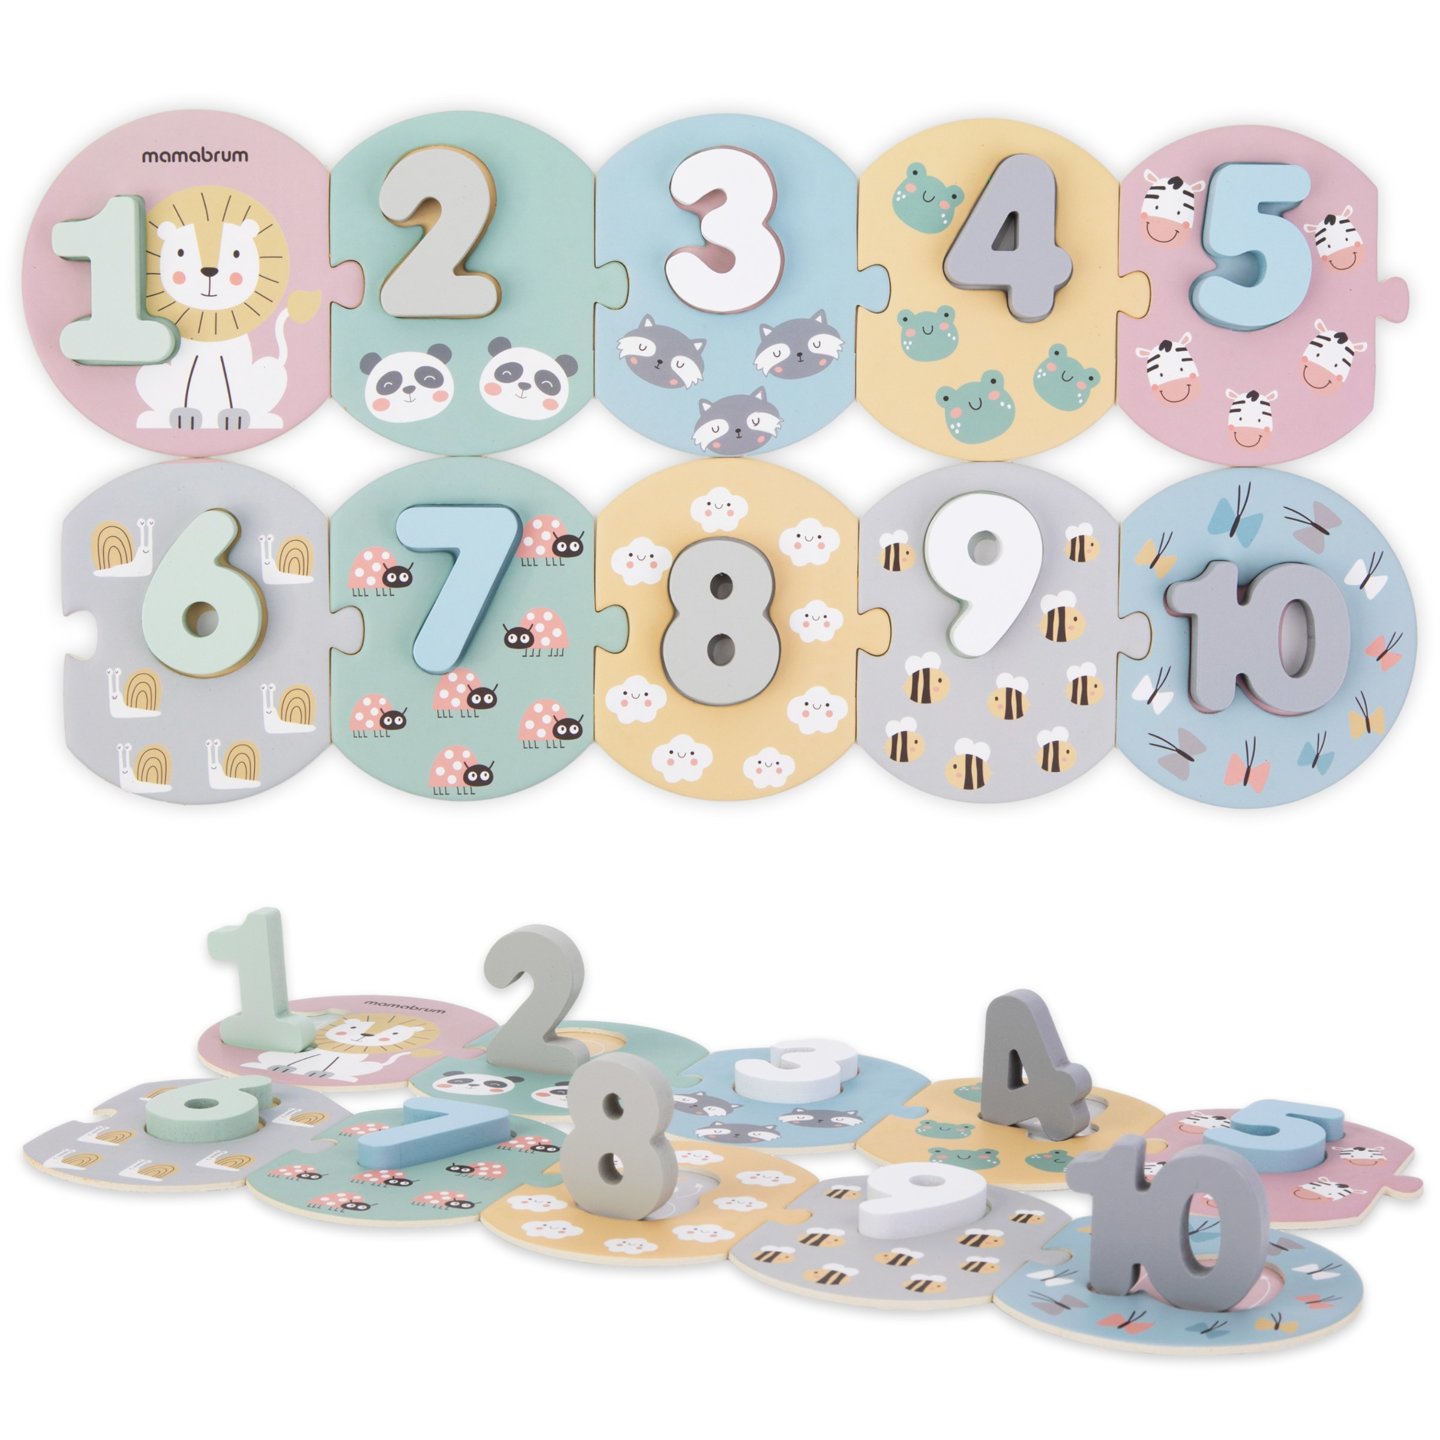 Educational wooden puzzle with numbers